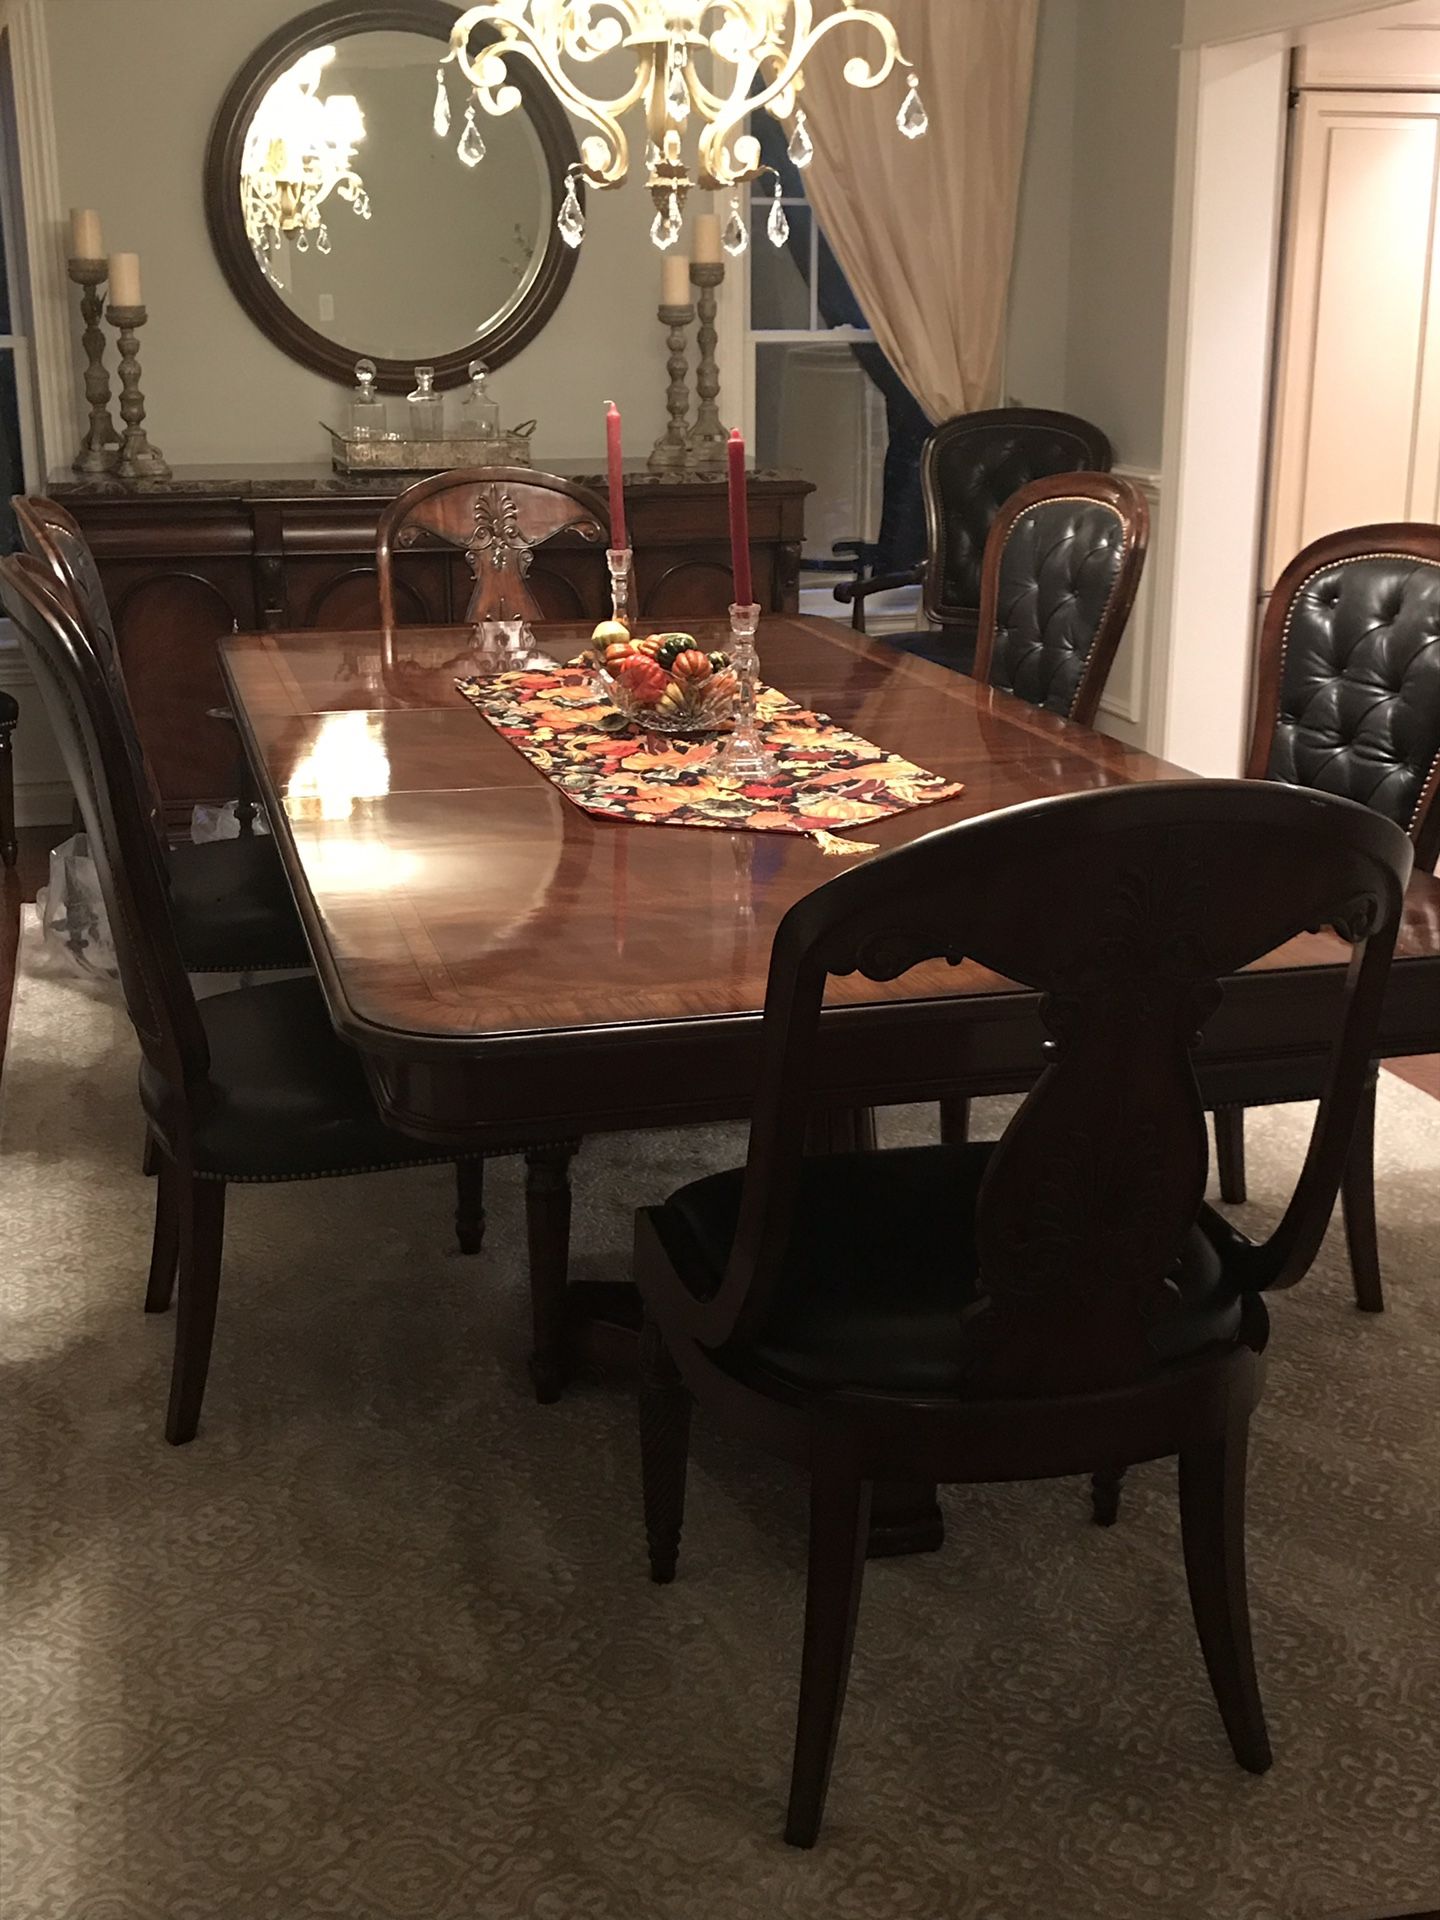 Henredon dining set with marble buffet. Just like new. 8 chairs, 2 with ornate wooden backs.